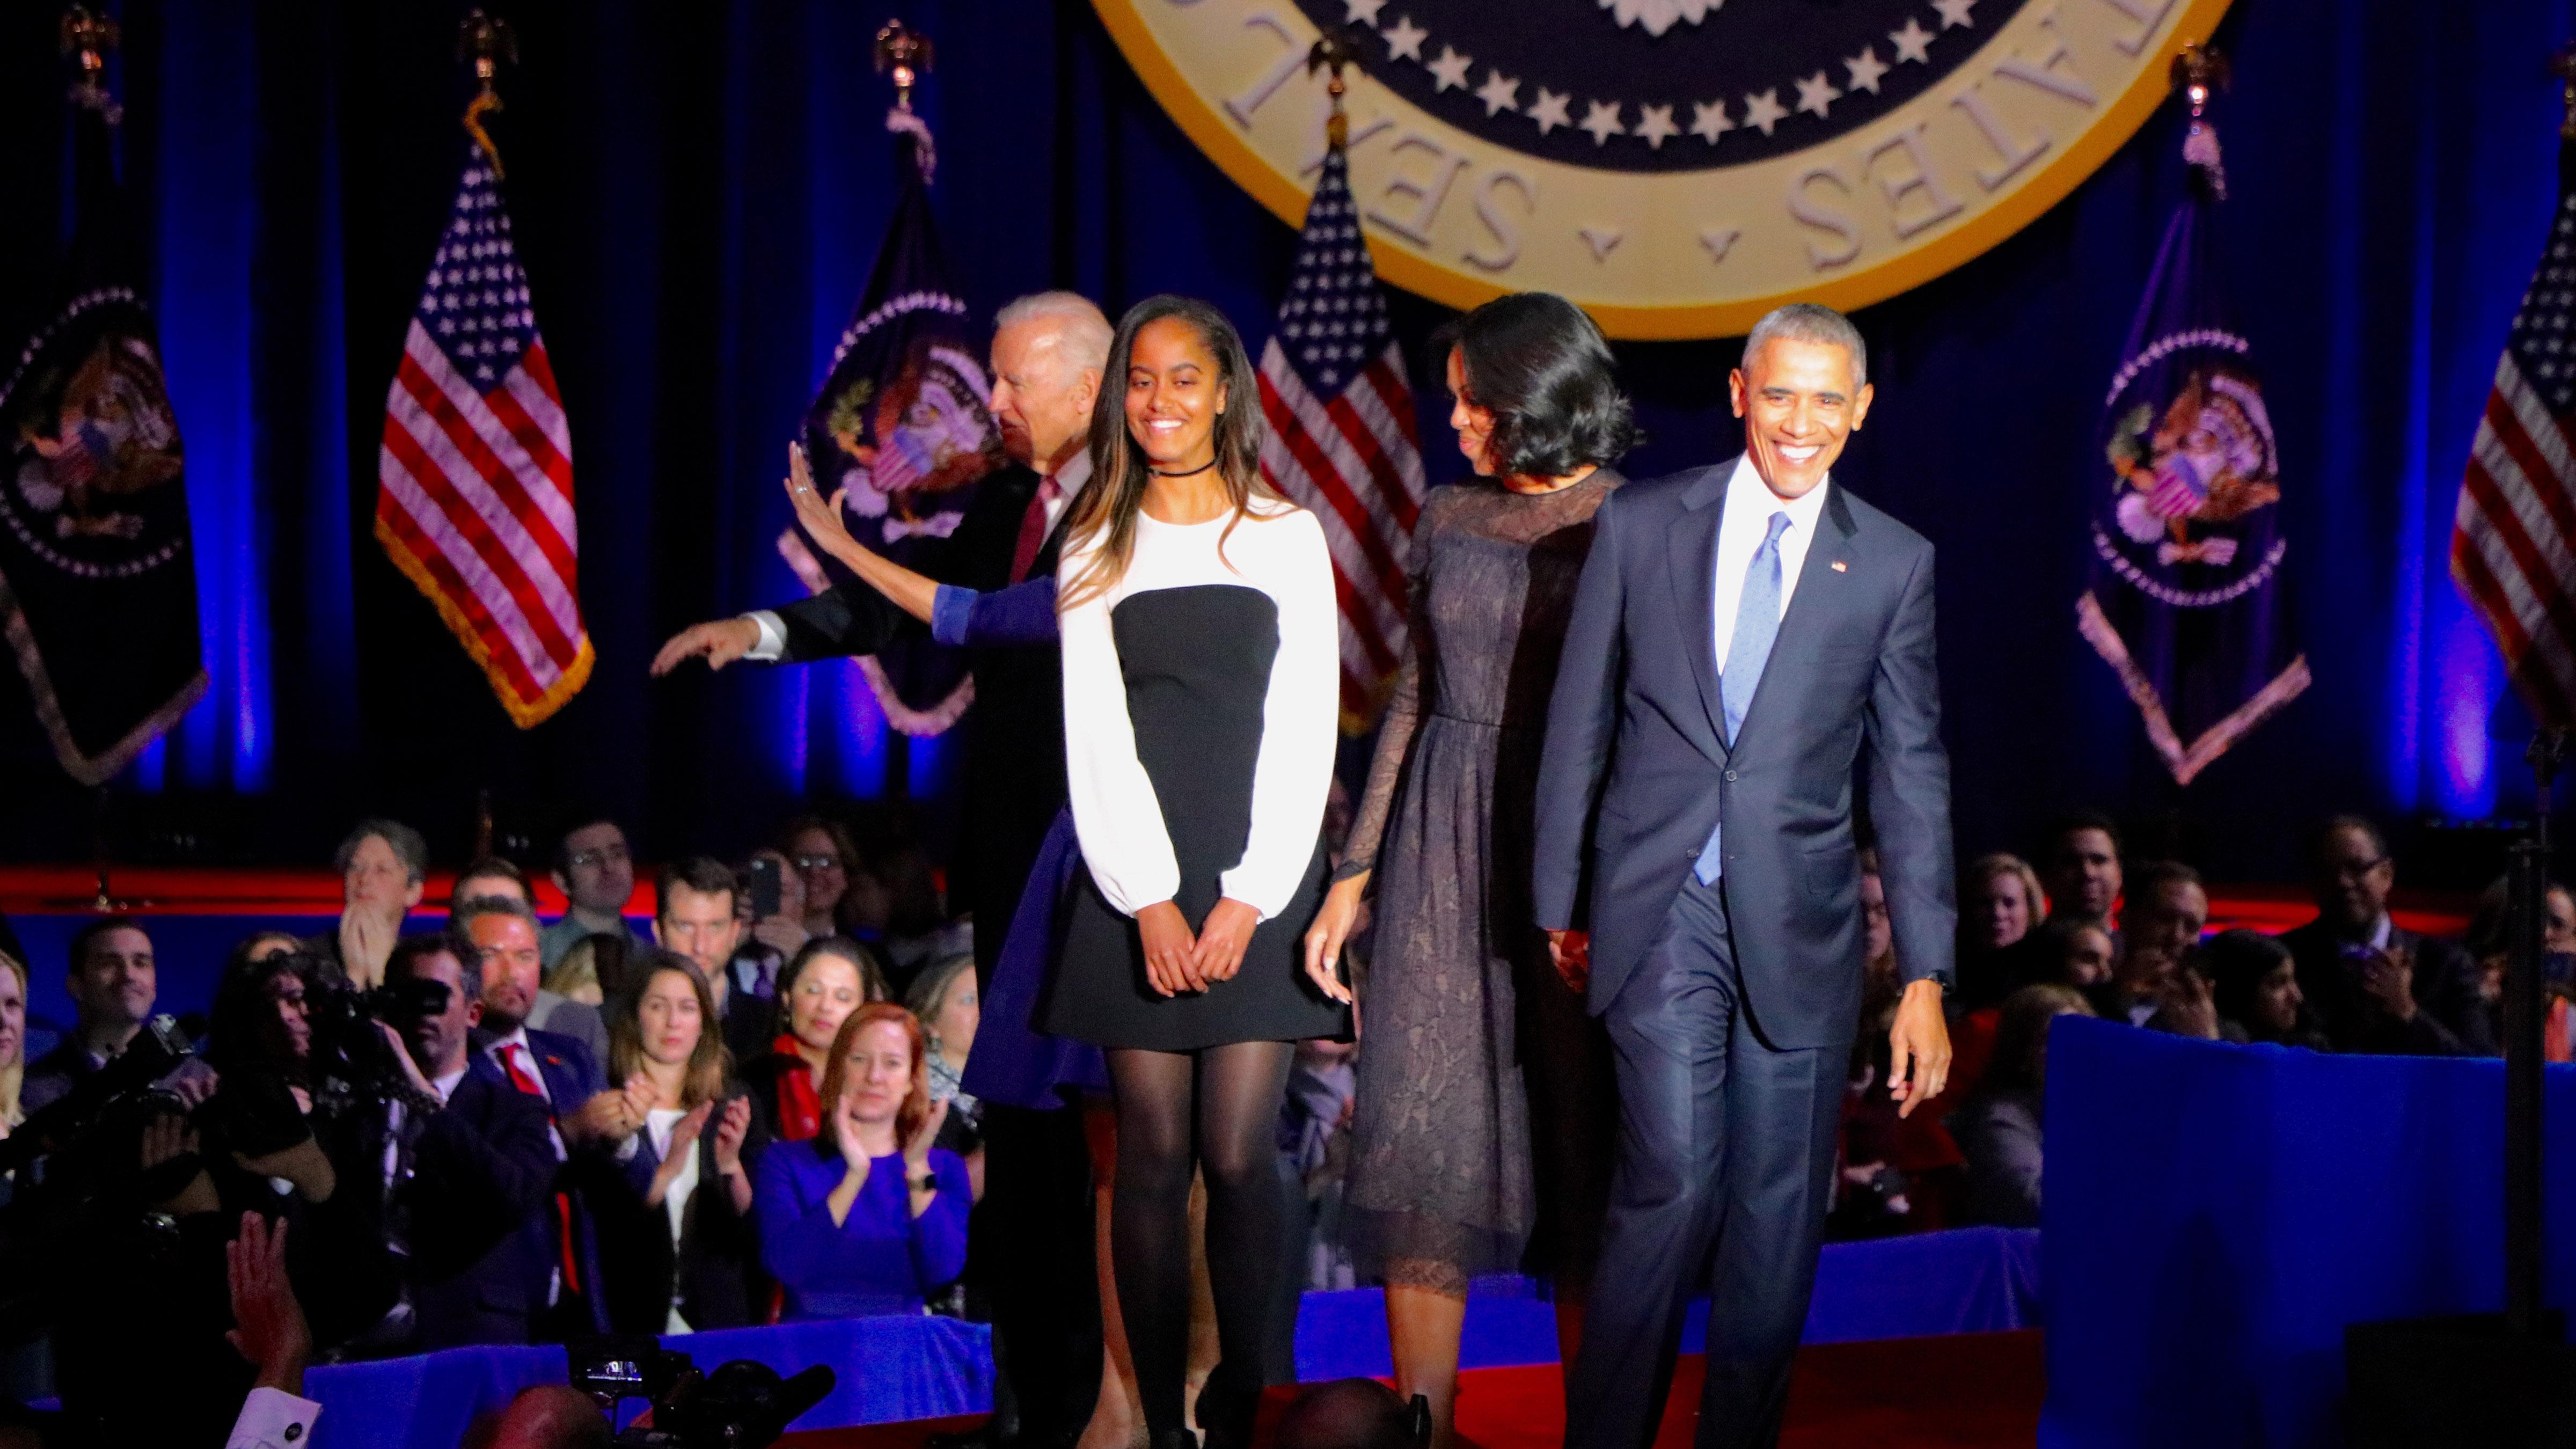 First Lady Michelle Obama, daughter Malia Obama, Vice President Joe Biden and Dr. Jill Biden join the president onstage after he finishes his speech. (Evan Garcia / Chicago Tonight)